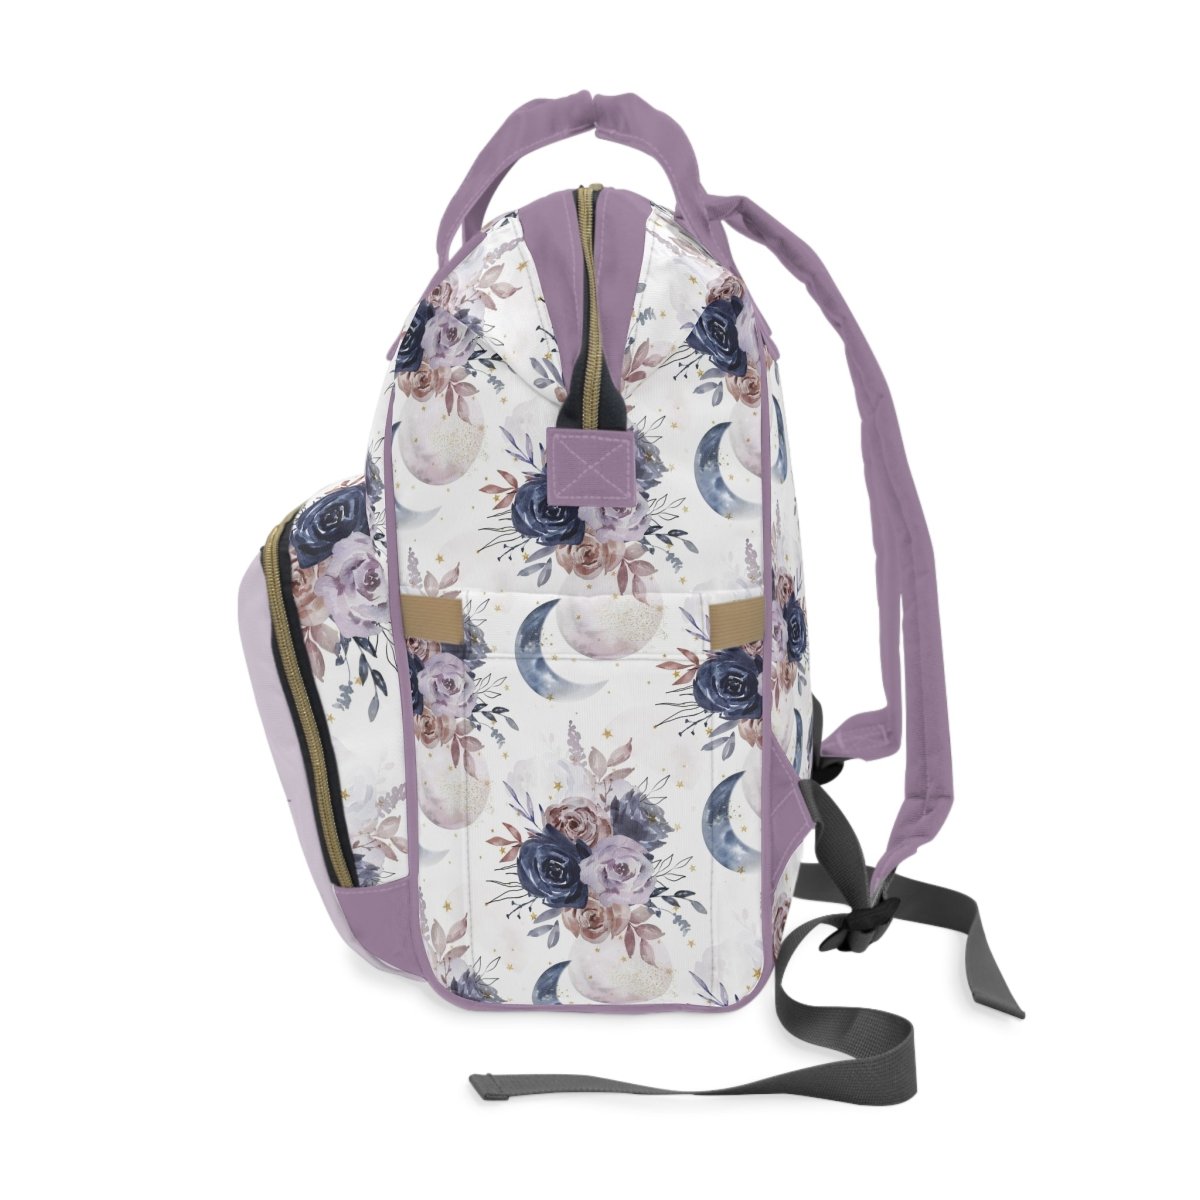 Floral Moon Personalized Backpack Diaper Bag - Floral Moon, gender_girl, text